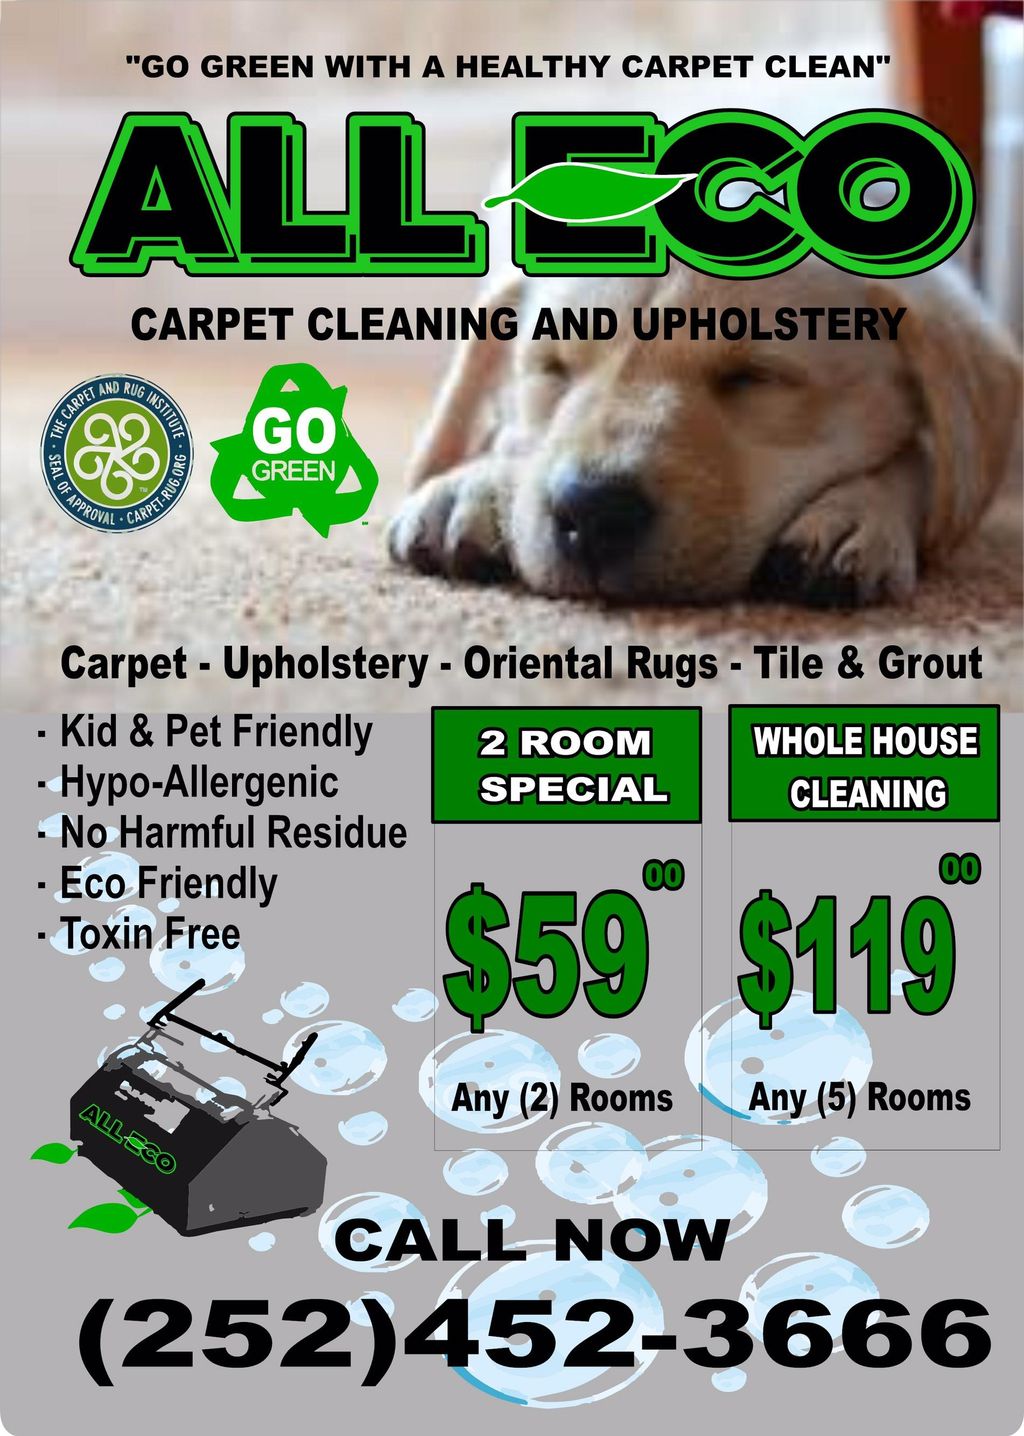 All Eco Carpet Cleaning and Upholstery